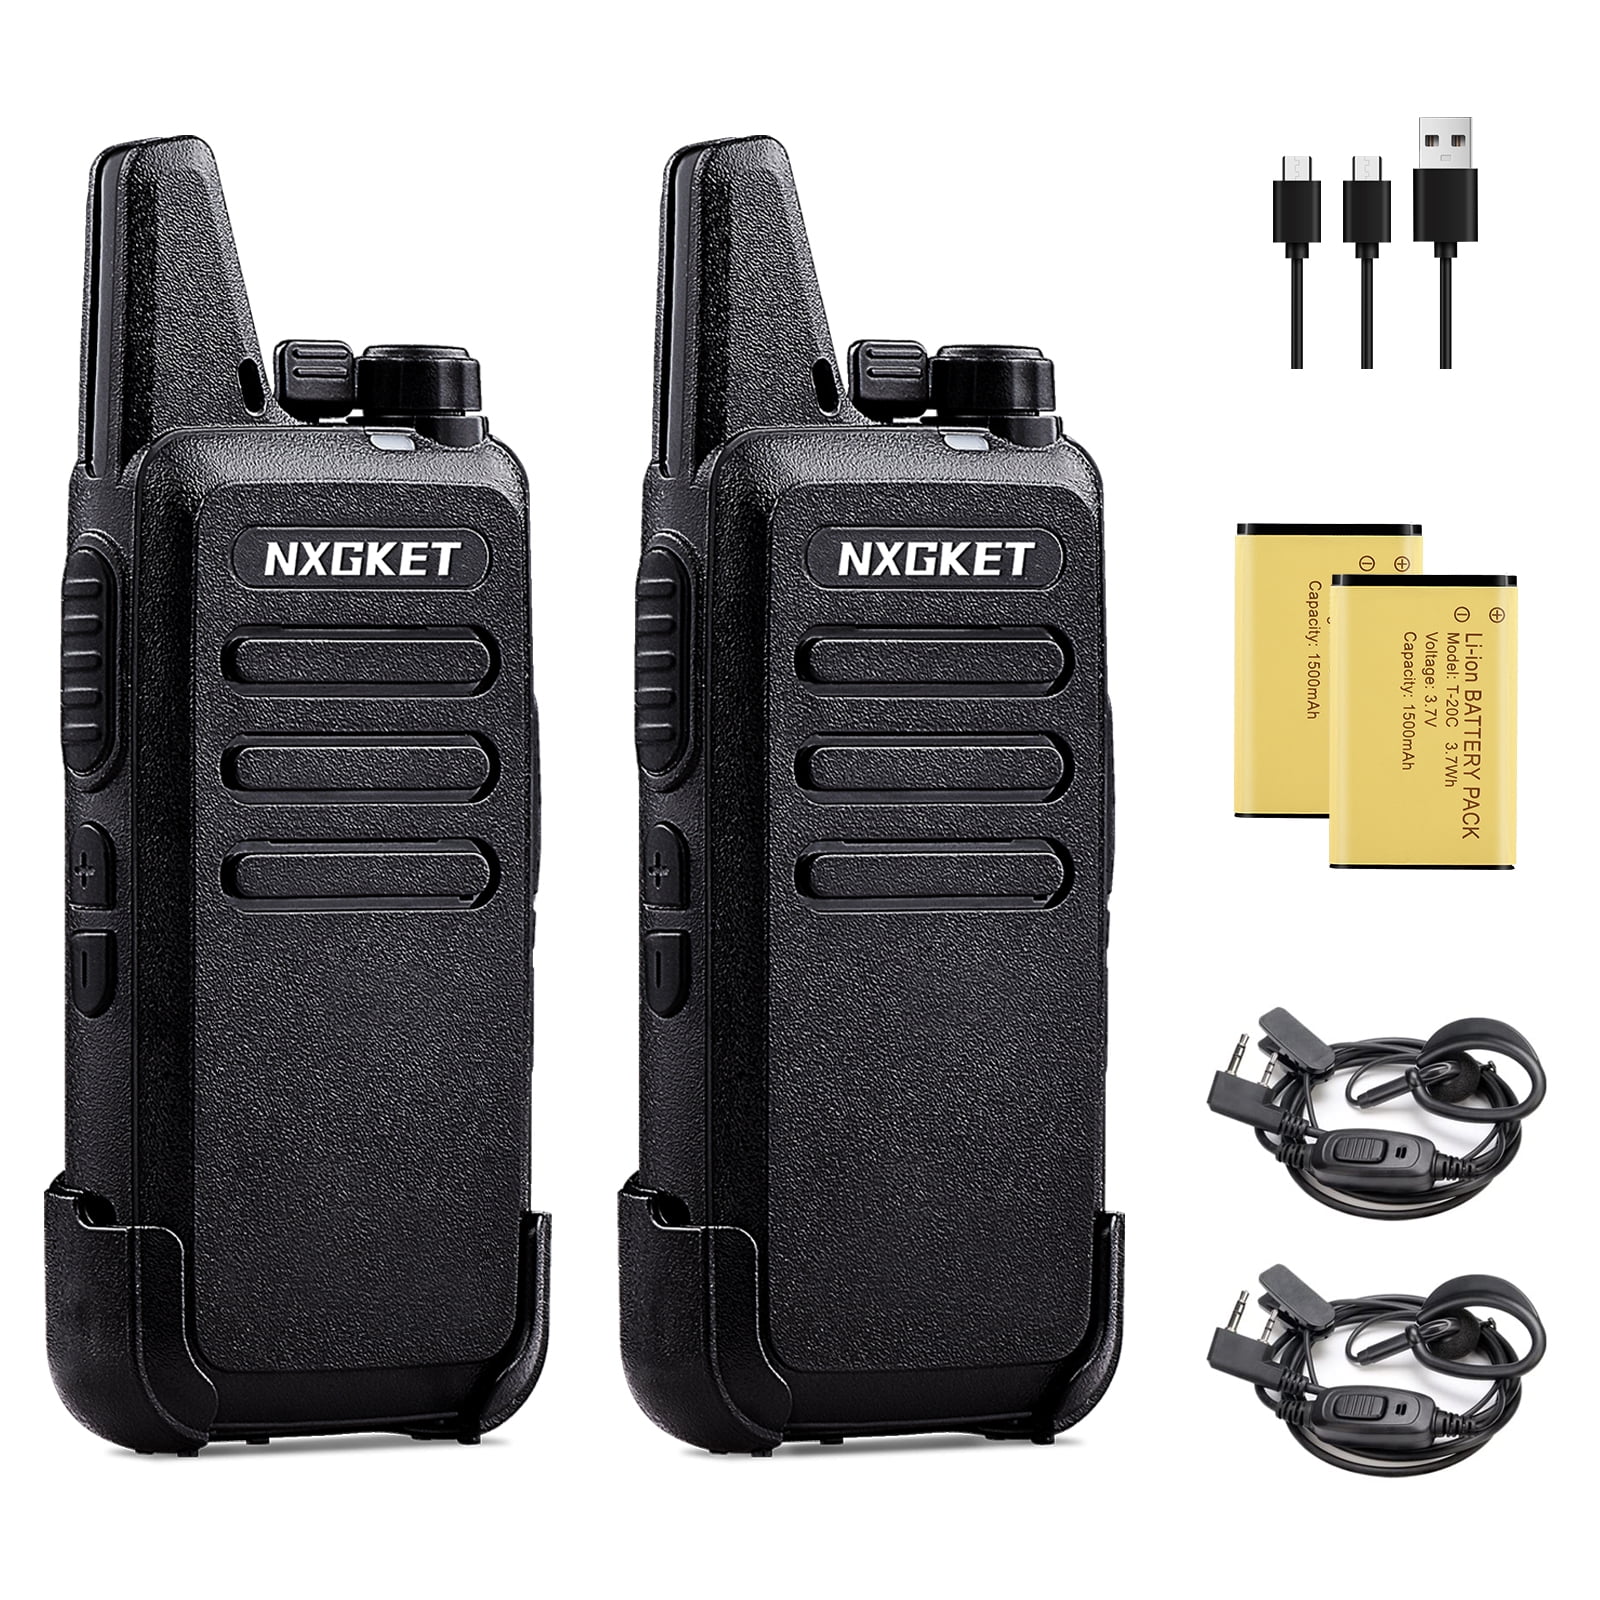 NXGKET Walkie Talkies for Adults, Portable Two Way Radio Rechargeable Long  Range Hands Free with 1500mAh Battery Earpiece for Commercial Cruises Hotel  Hunting Hiking, Pack